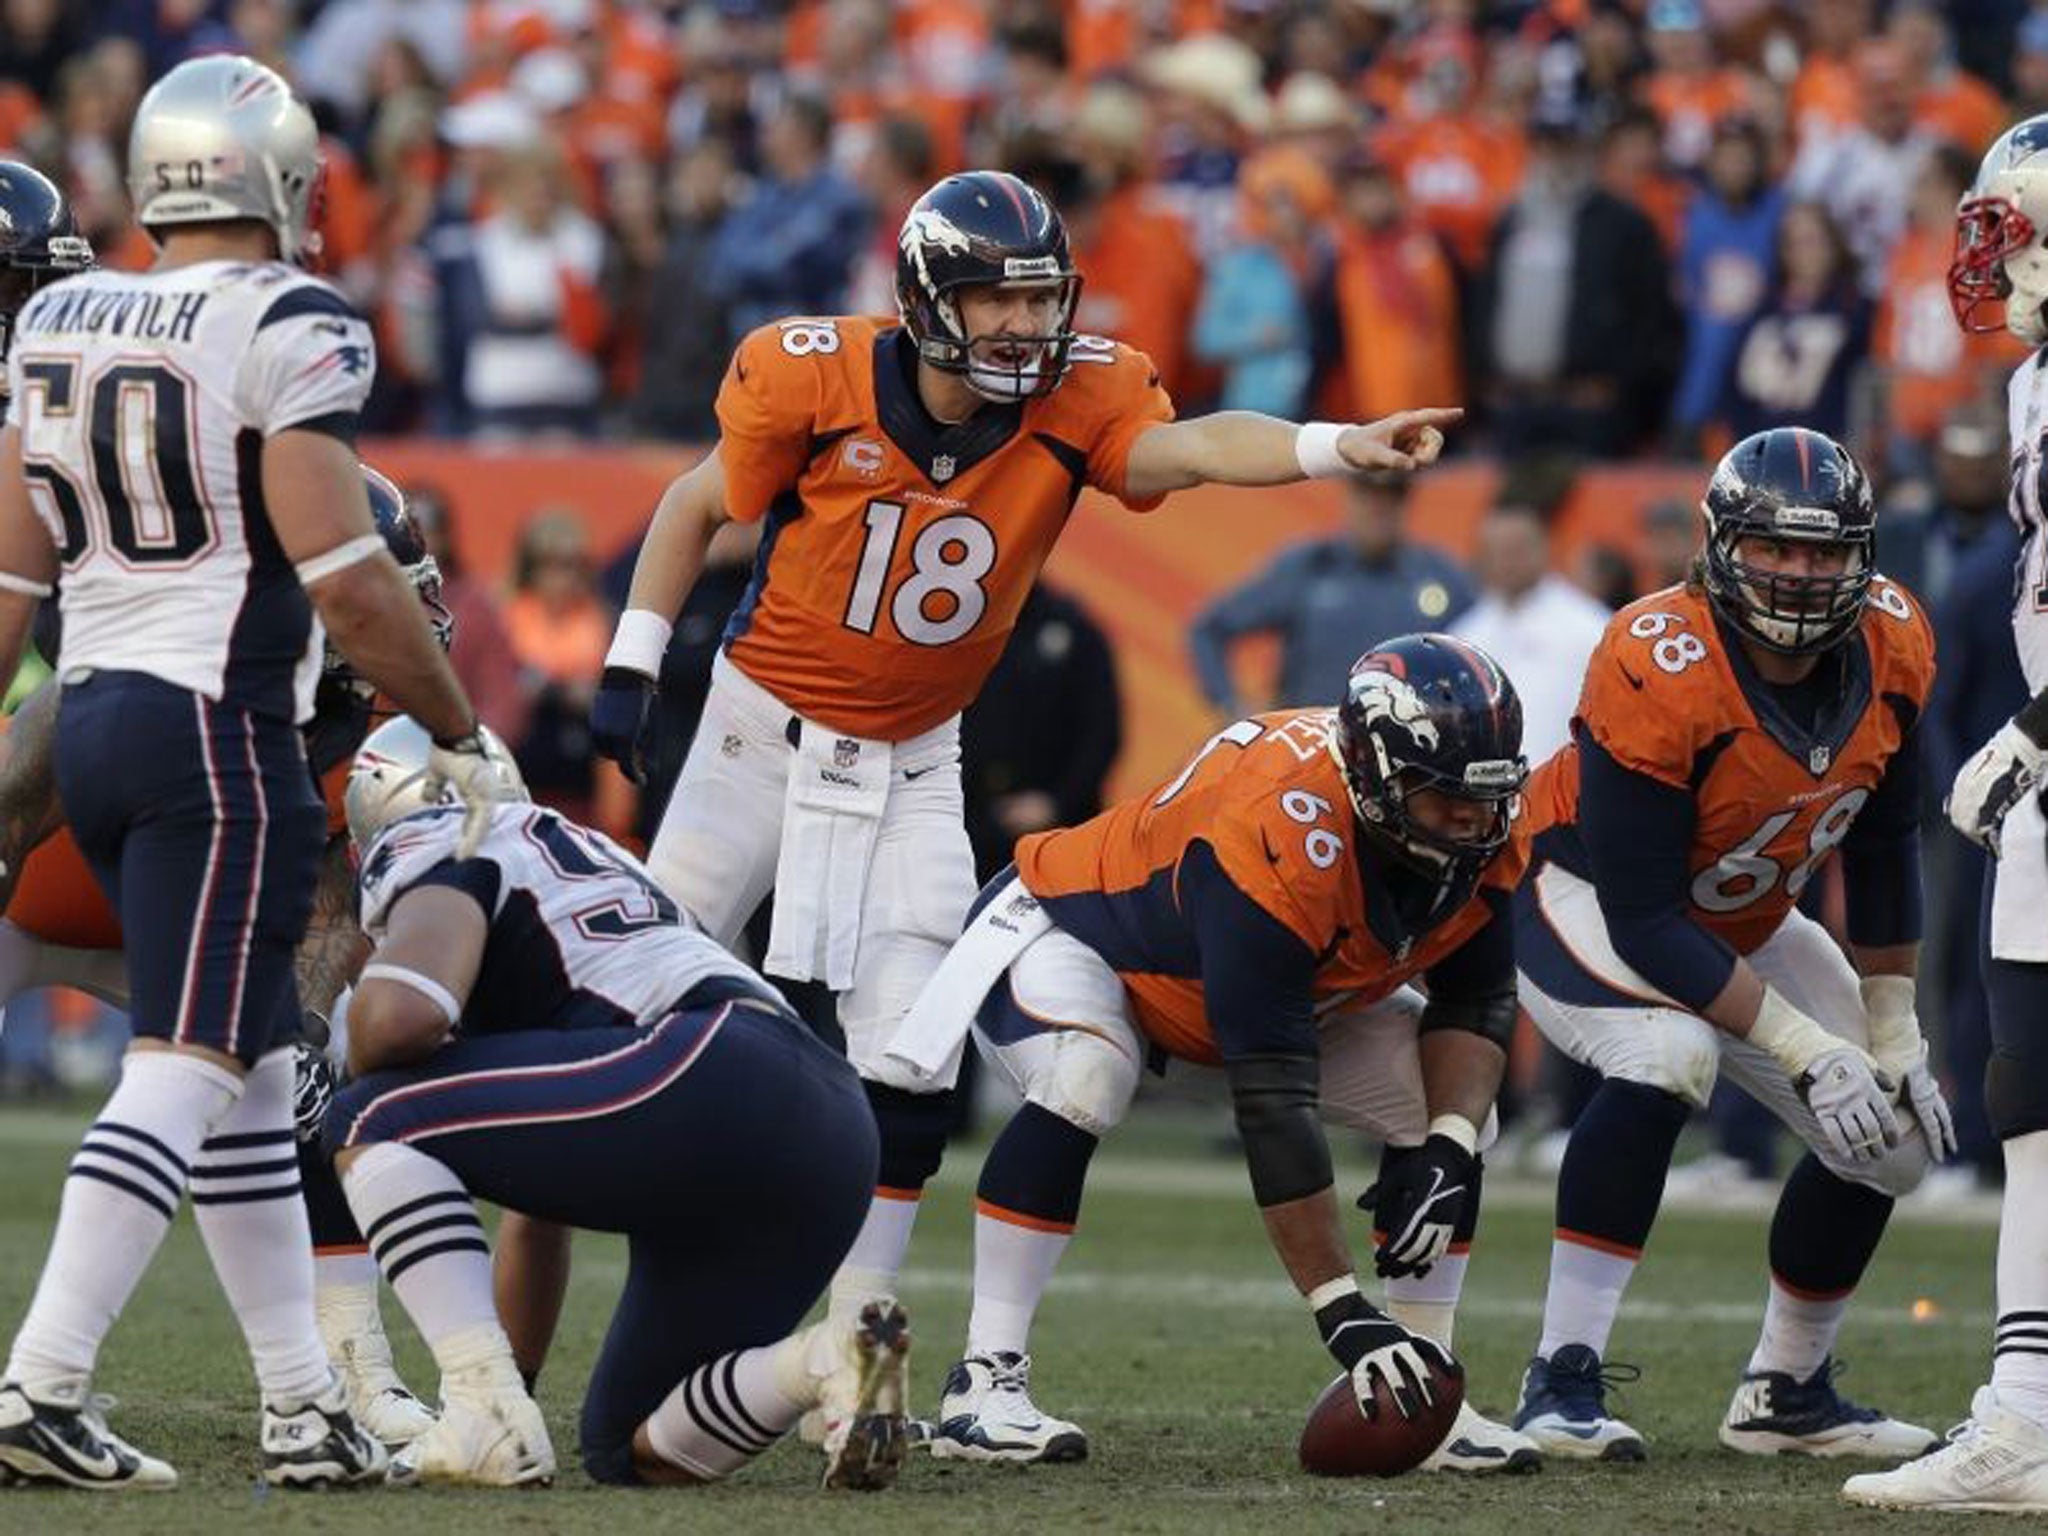 Fronting up: Denver Broncos’ Peyton Manning will face Seattle Seahawks